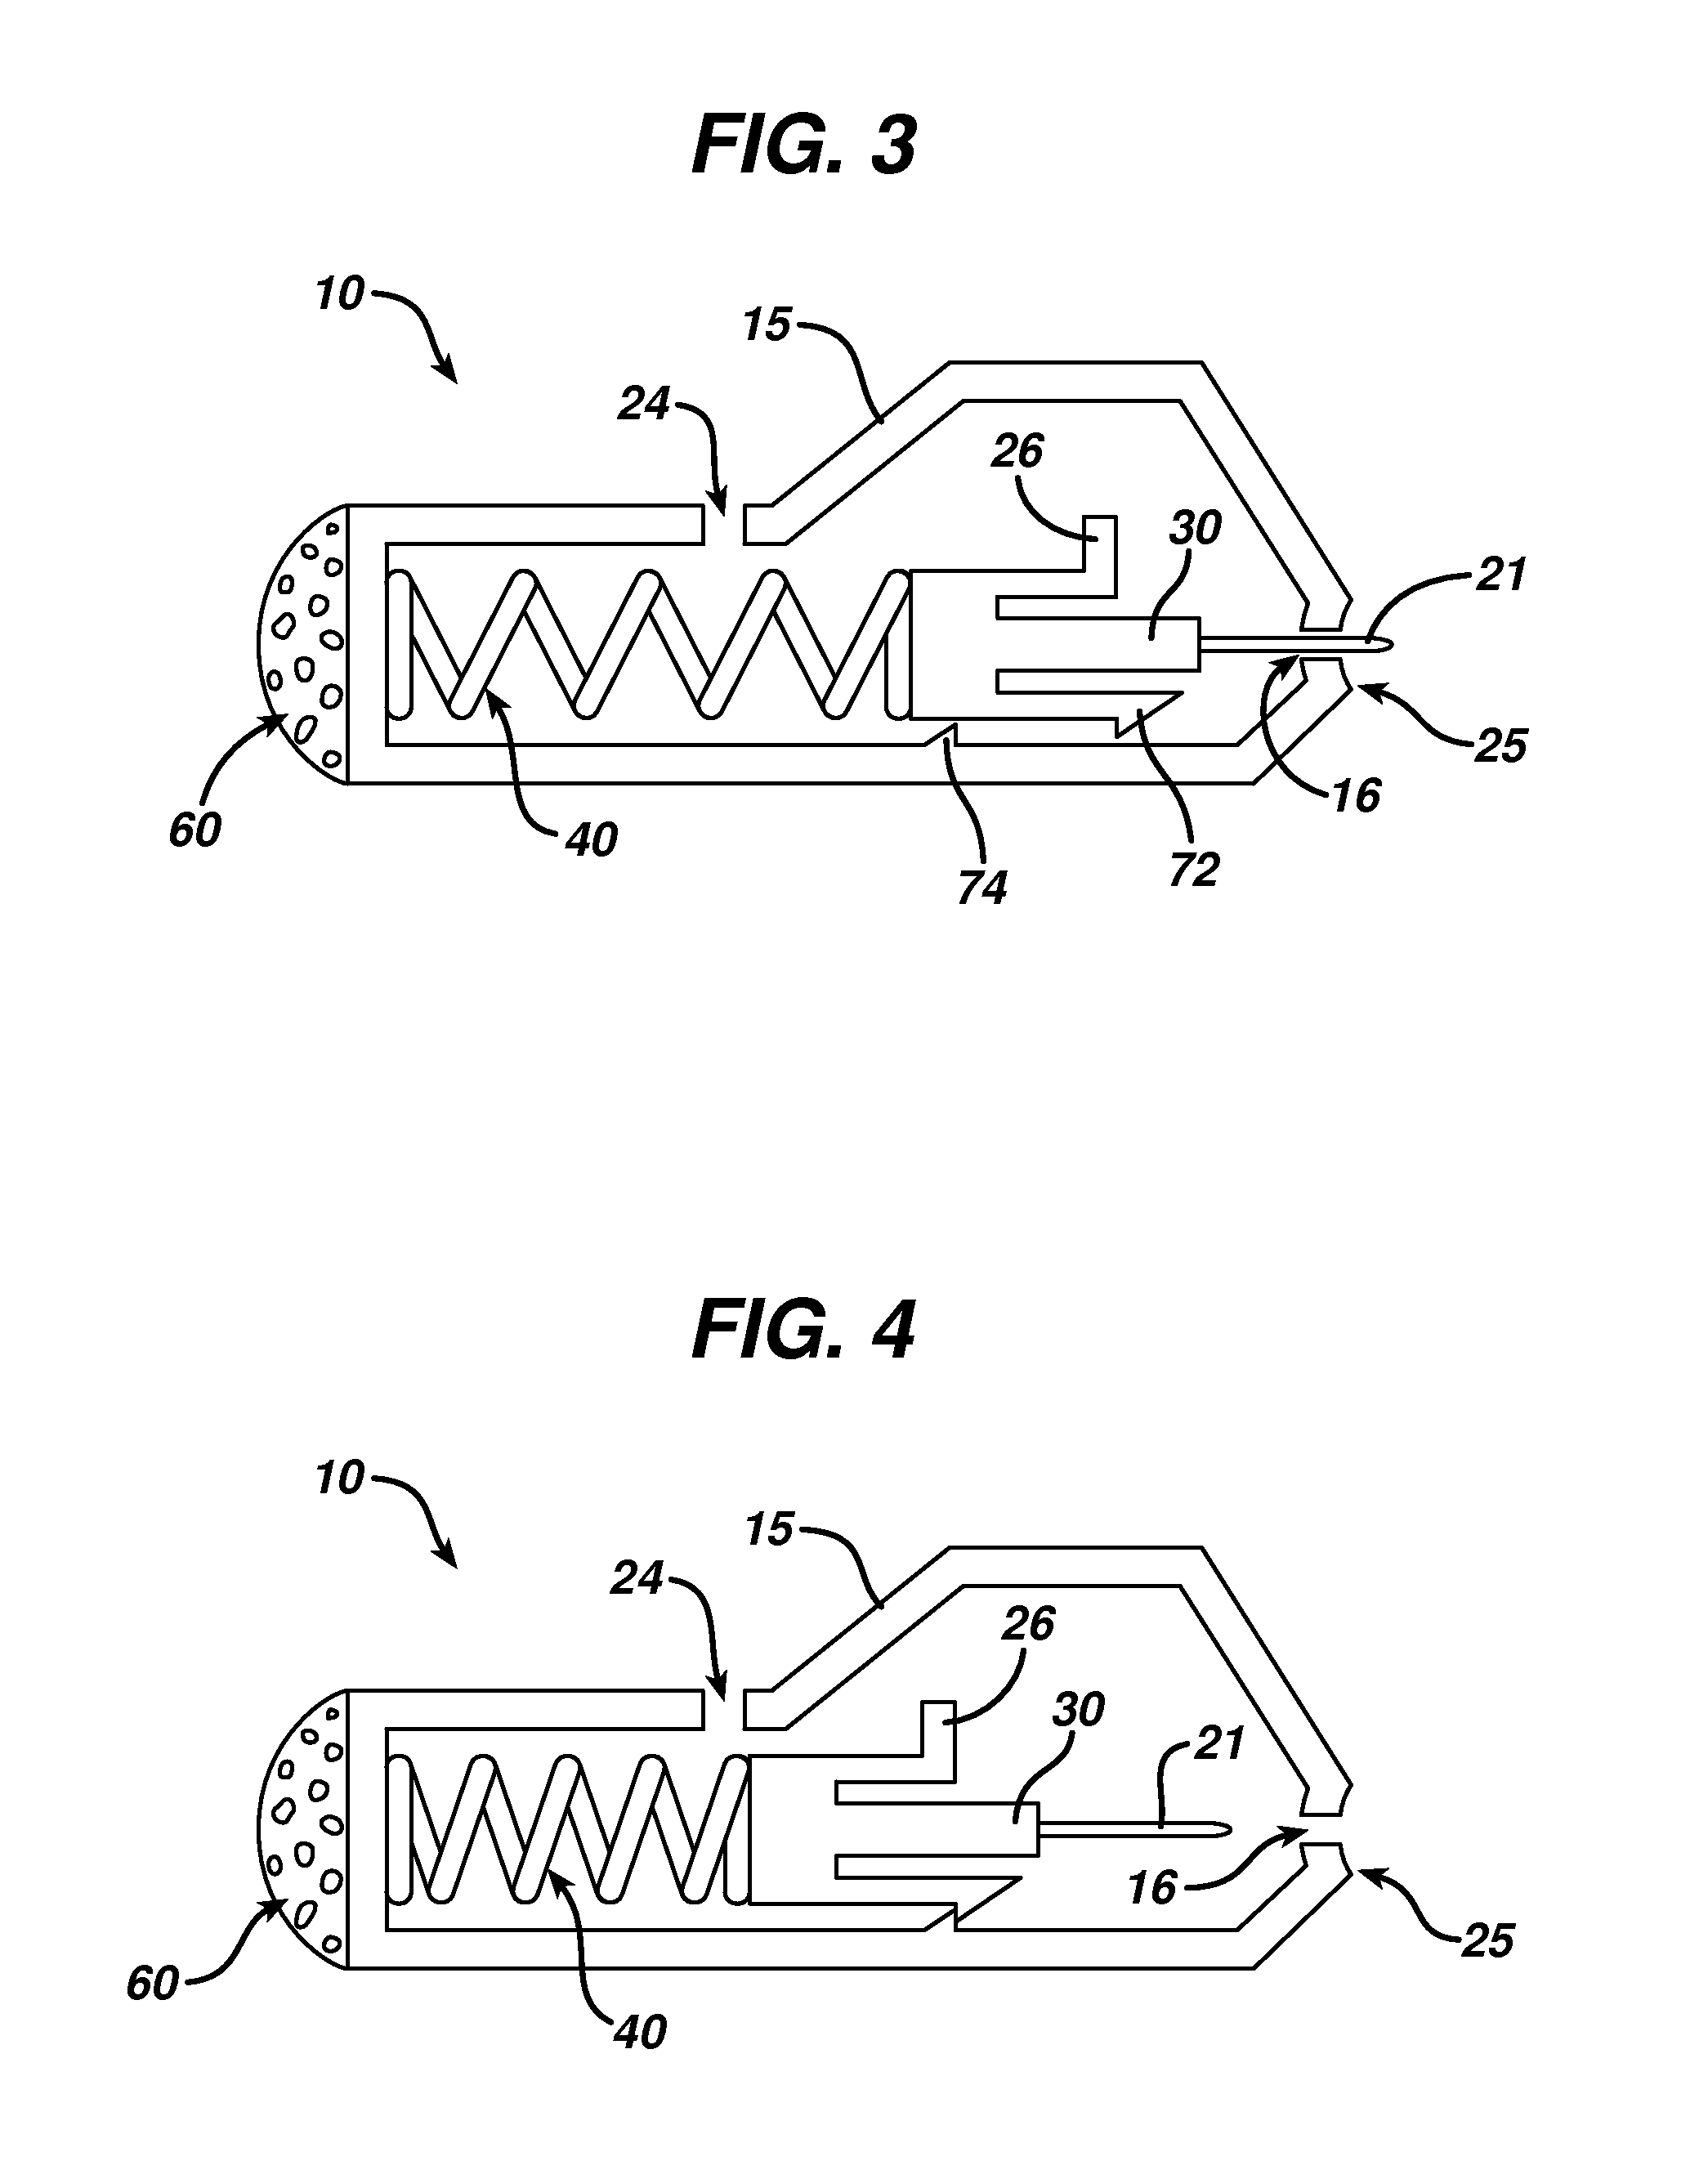 Skin-piercing device for treatment of acne